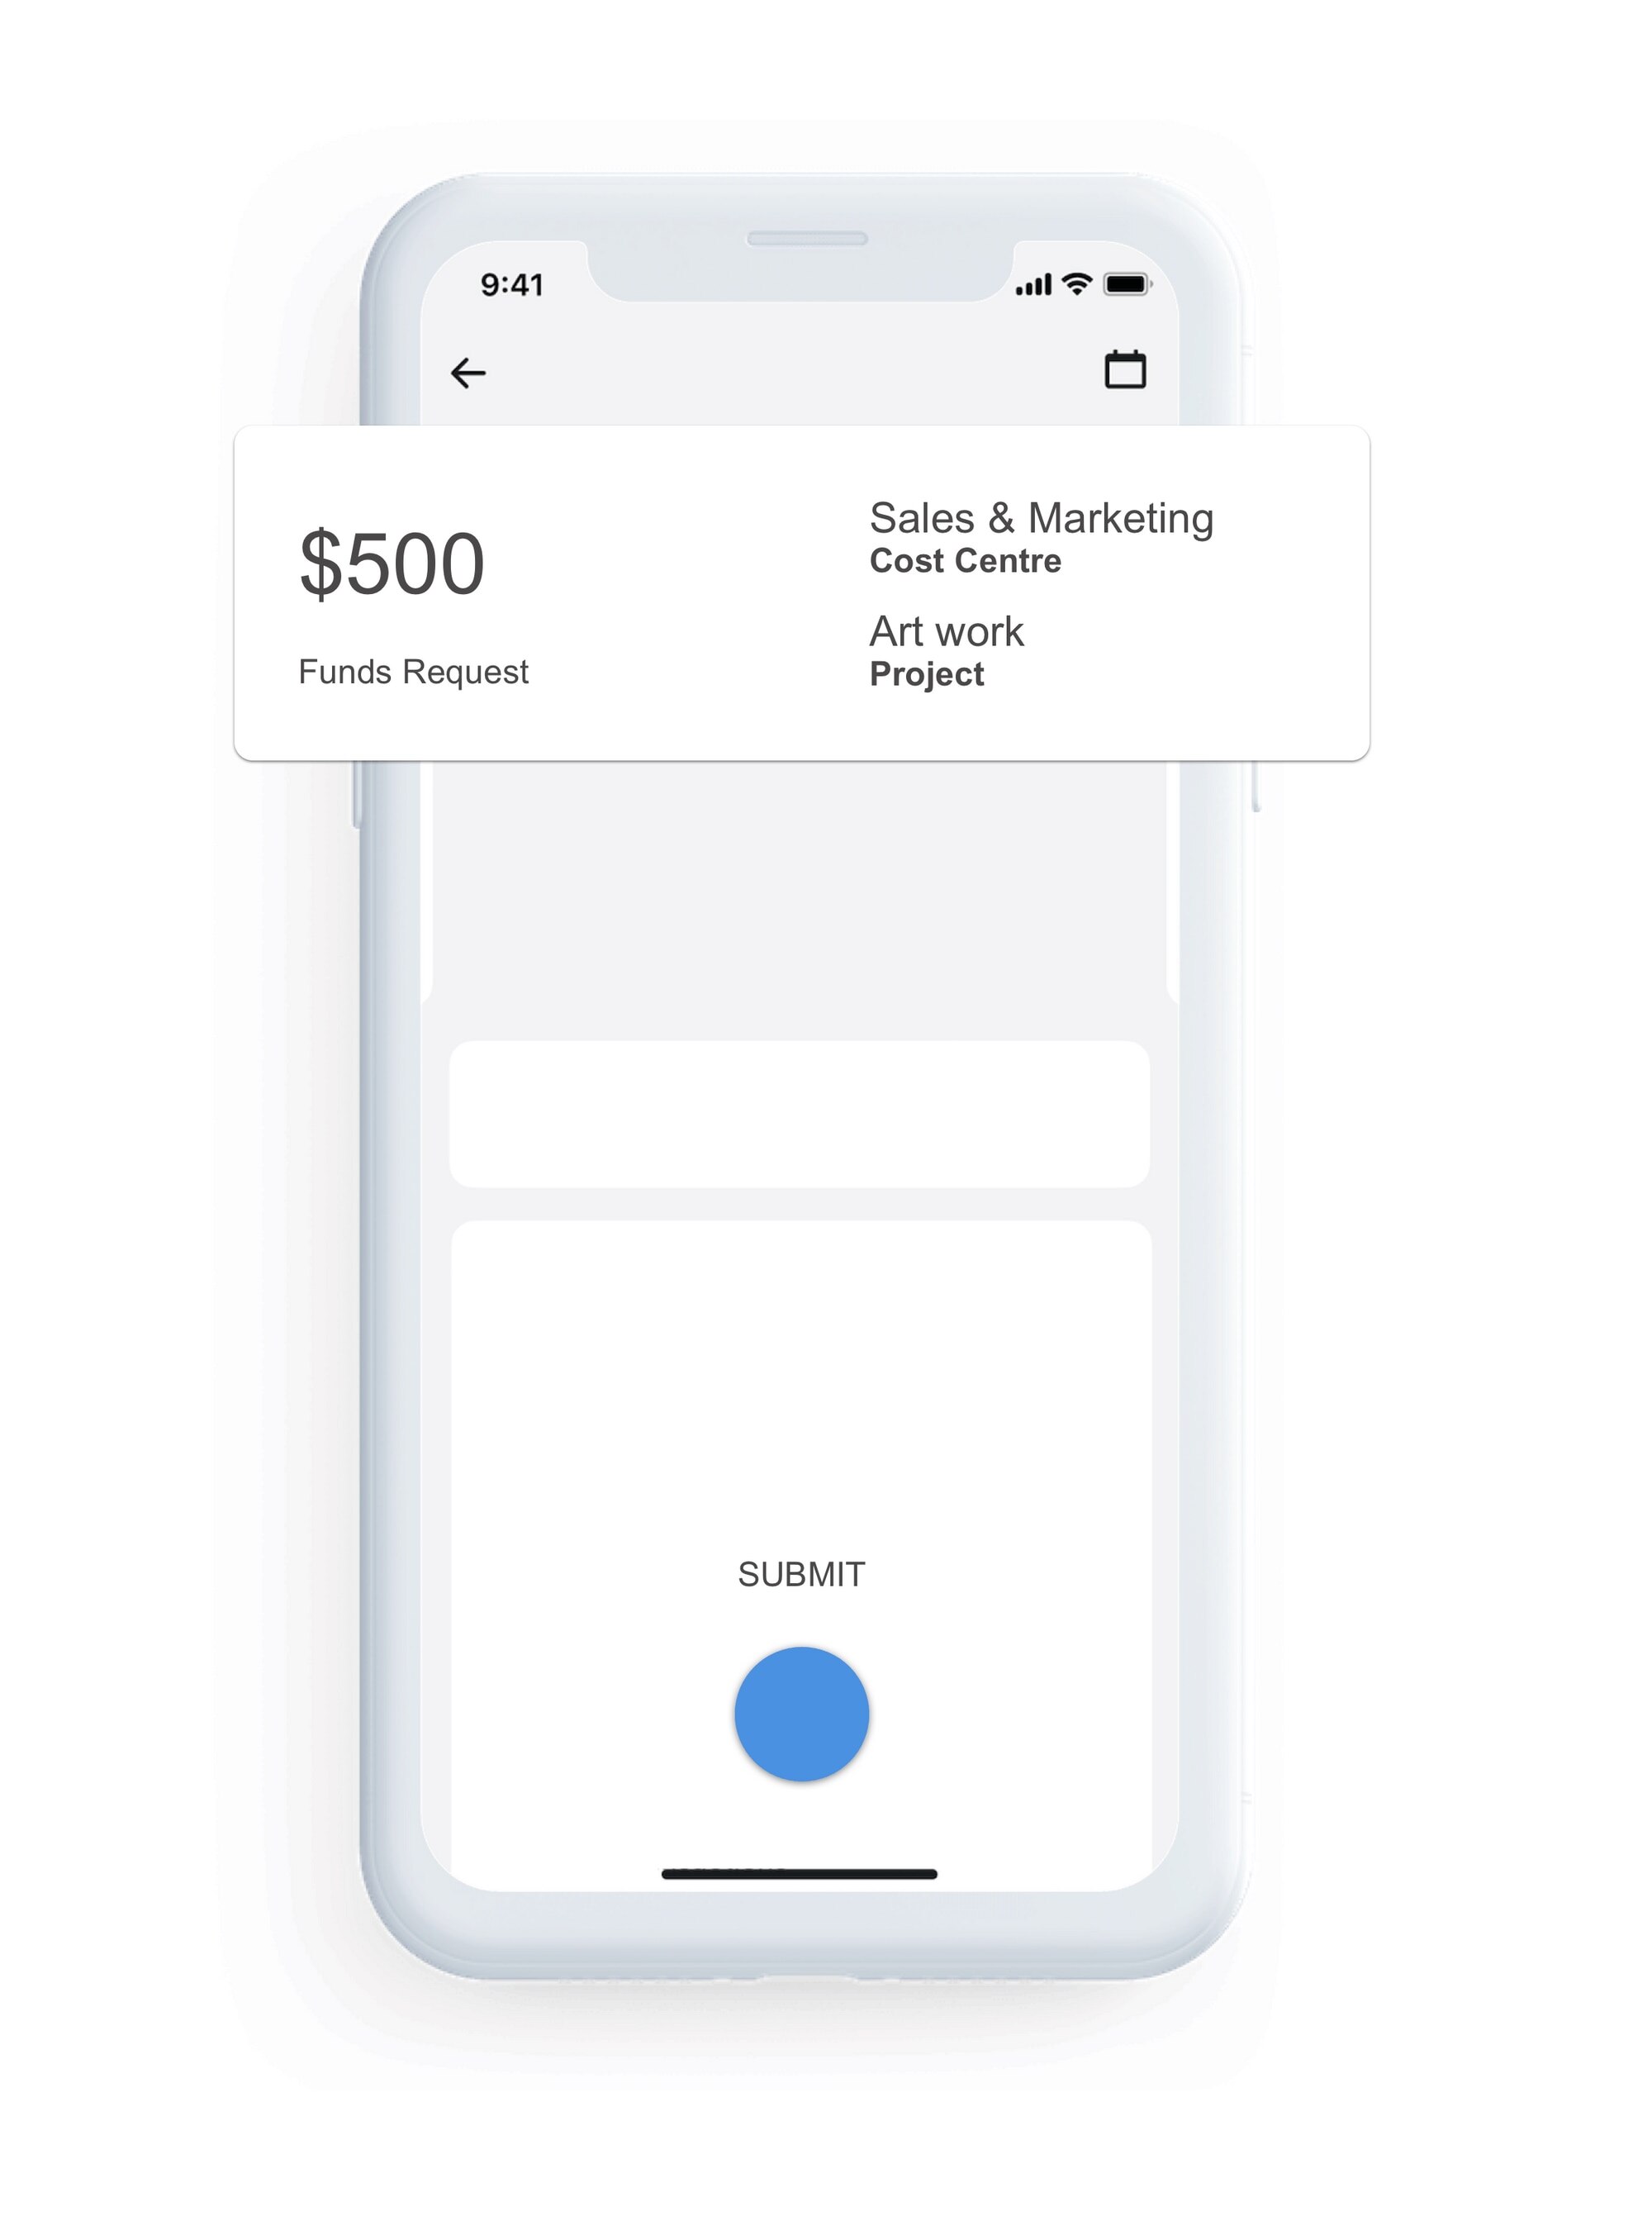 Mobile phone remotely approving fund requests with Penny app